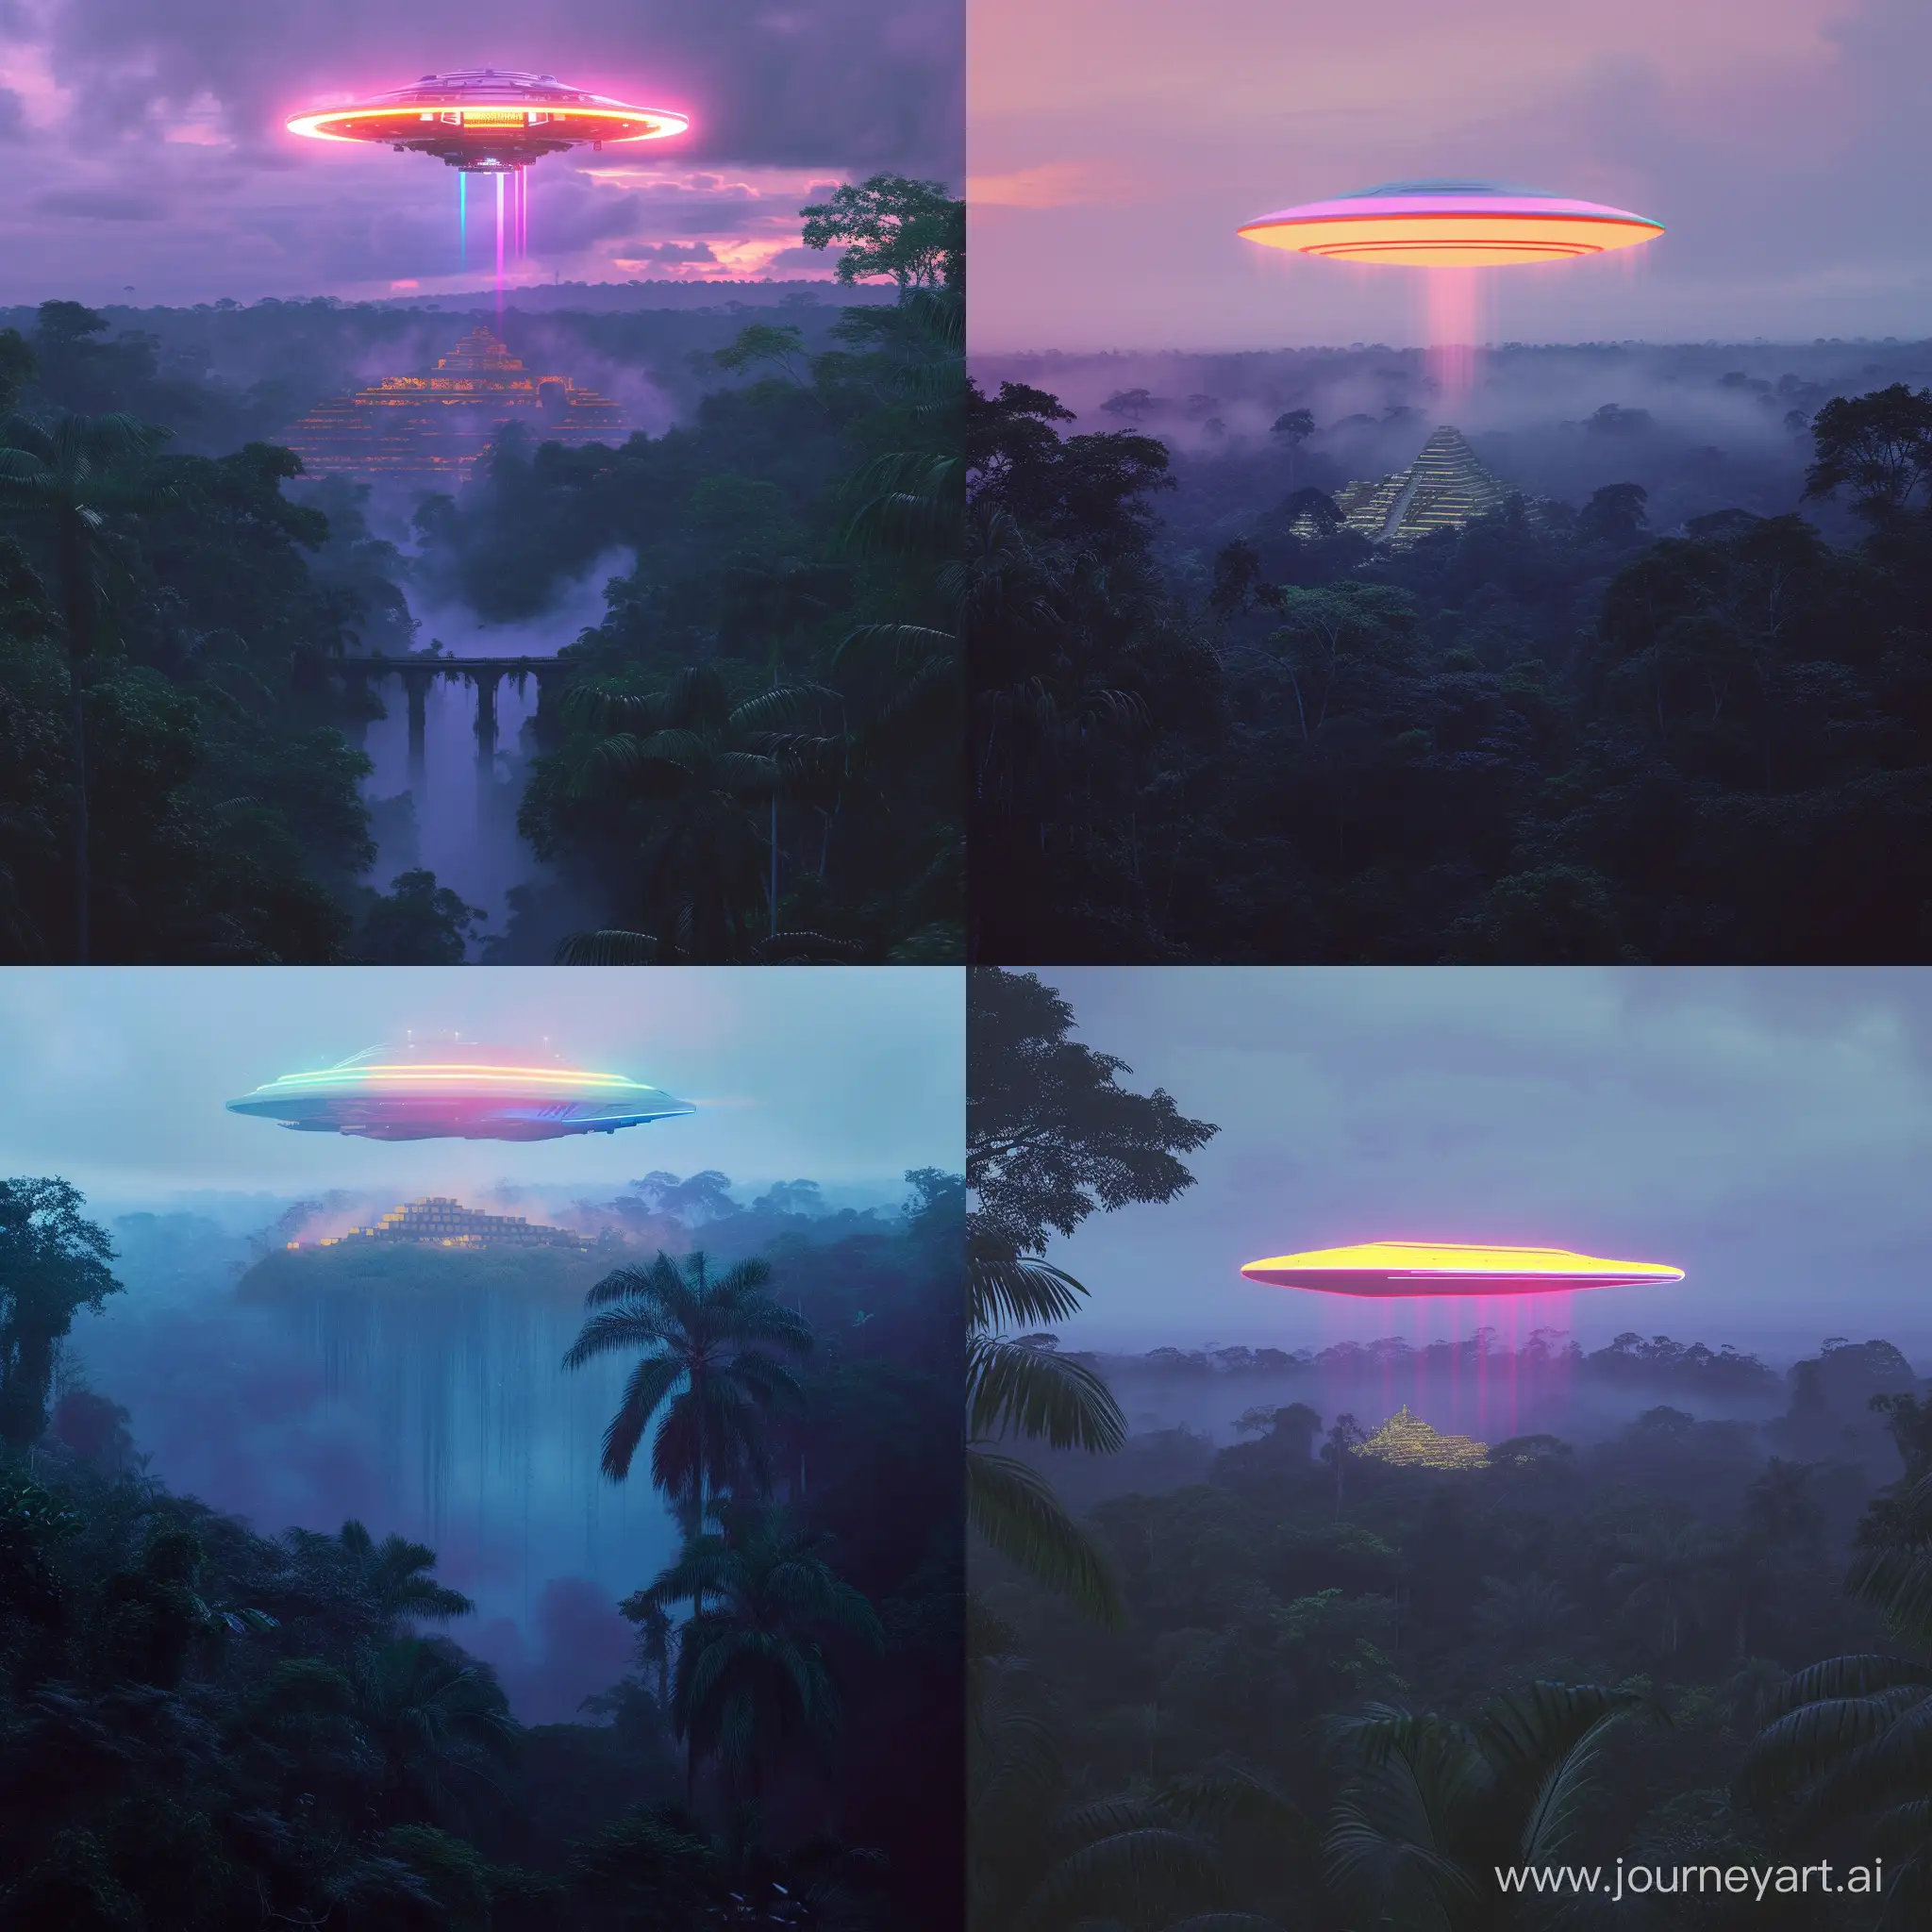 A surreal image of a neon gradient colored spaceship hovering above the lost city of gold hidden inside deep dense foggy Amazon jungle. Dusk.